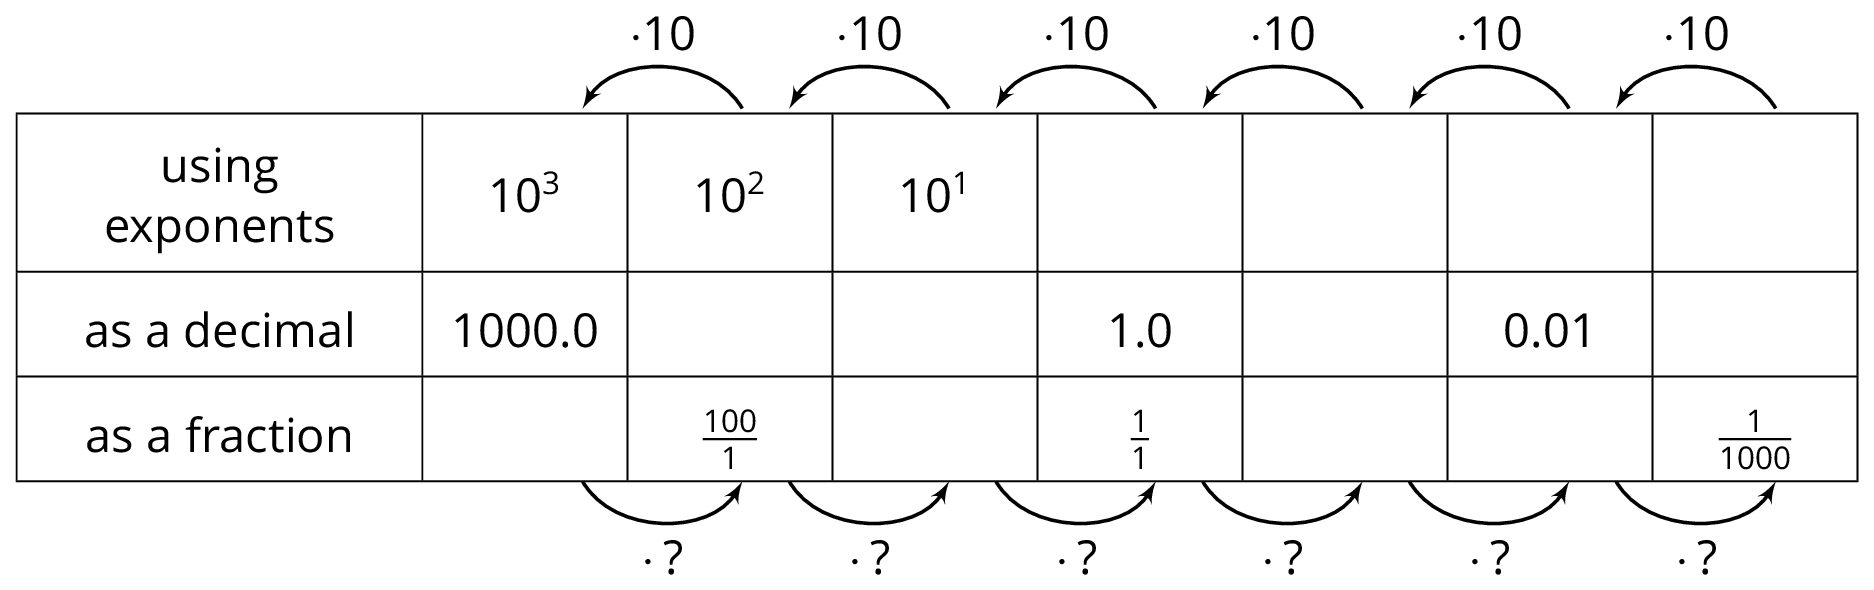 An 8 column table with 3 rows of data. The first column contains a row header for each row. The data are as follows. Row 1: using exponents, 10 cubed; 10 squared; 10 to the first power; blank; blank; blank; blank.  Row 2: as a decimal, 1000 point 0; blank; blank; 1 point 0; blank, 0 point 0 1; blank.  Row 3: as a fraction, blank, the fraction 100 over 1; blank; the fraction 1 over 1; blank; blank; the fraction 1 over 1000. Above the table are arrows pointing from the 8th column to the 7th, the 7th column to the 6th, and so on. These arrows are labeled "mulitply by 10". Below the table are arrows pointing from the 2nd column to the 3rd, the 3rd column to the 4th, and so on. These arrows are labeled "mulitply by question mark".